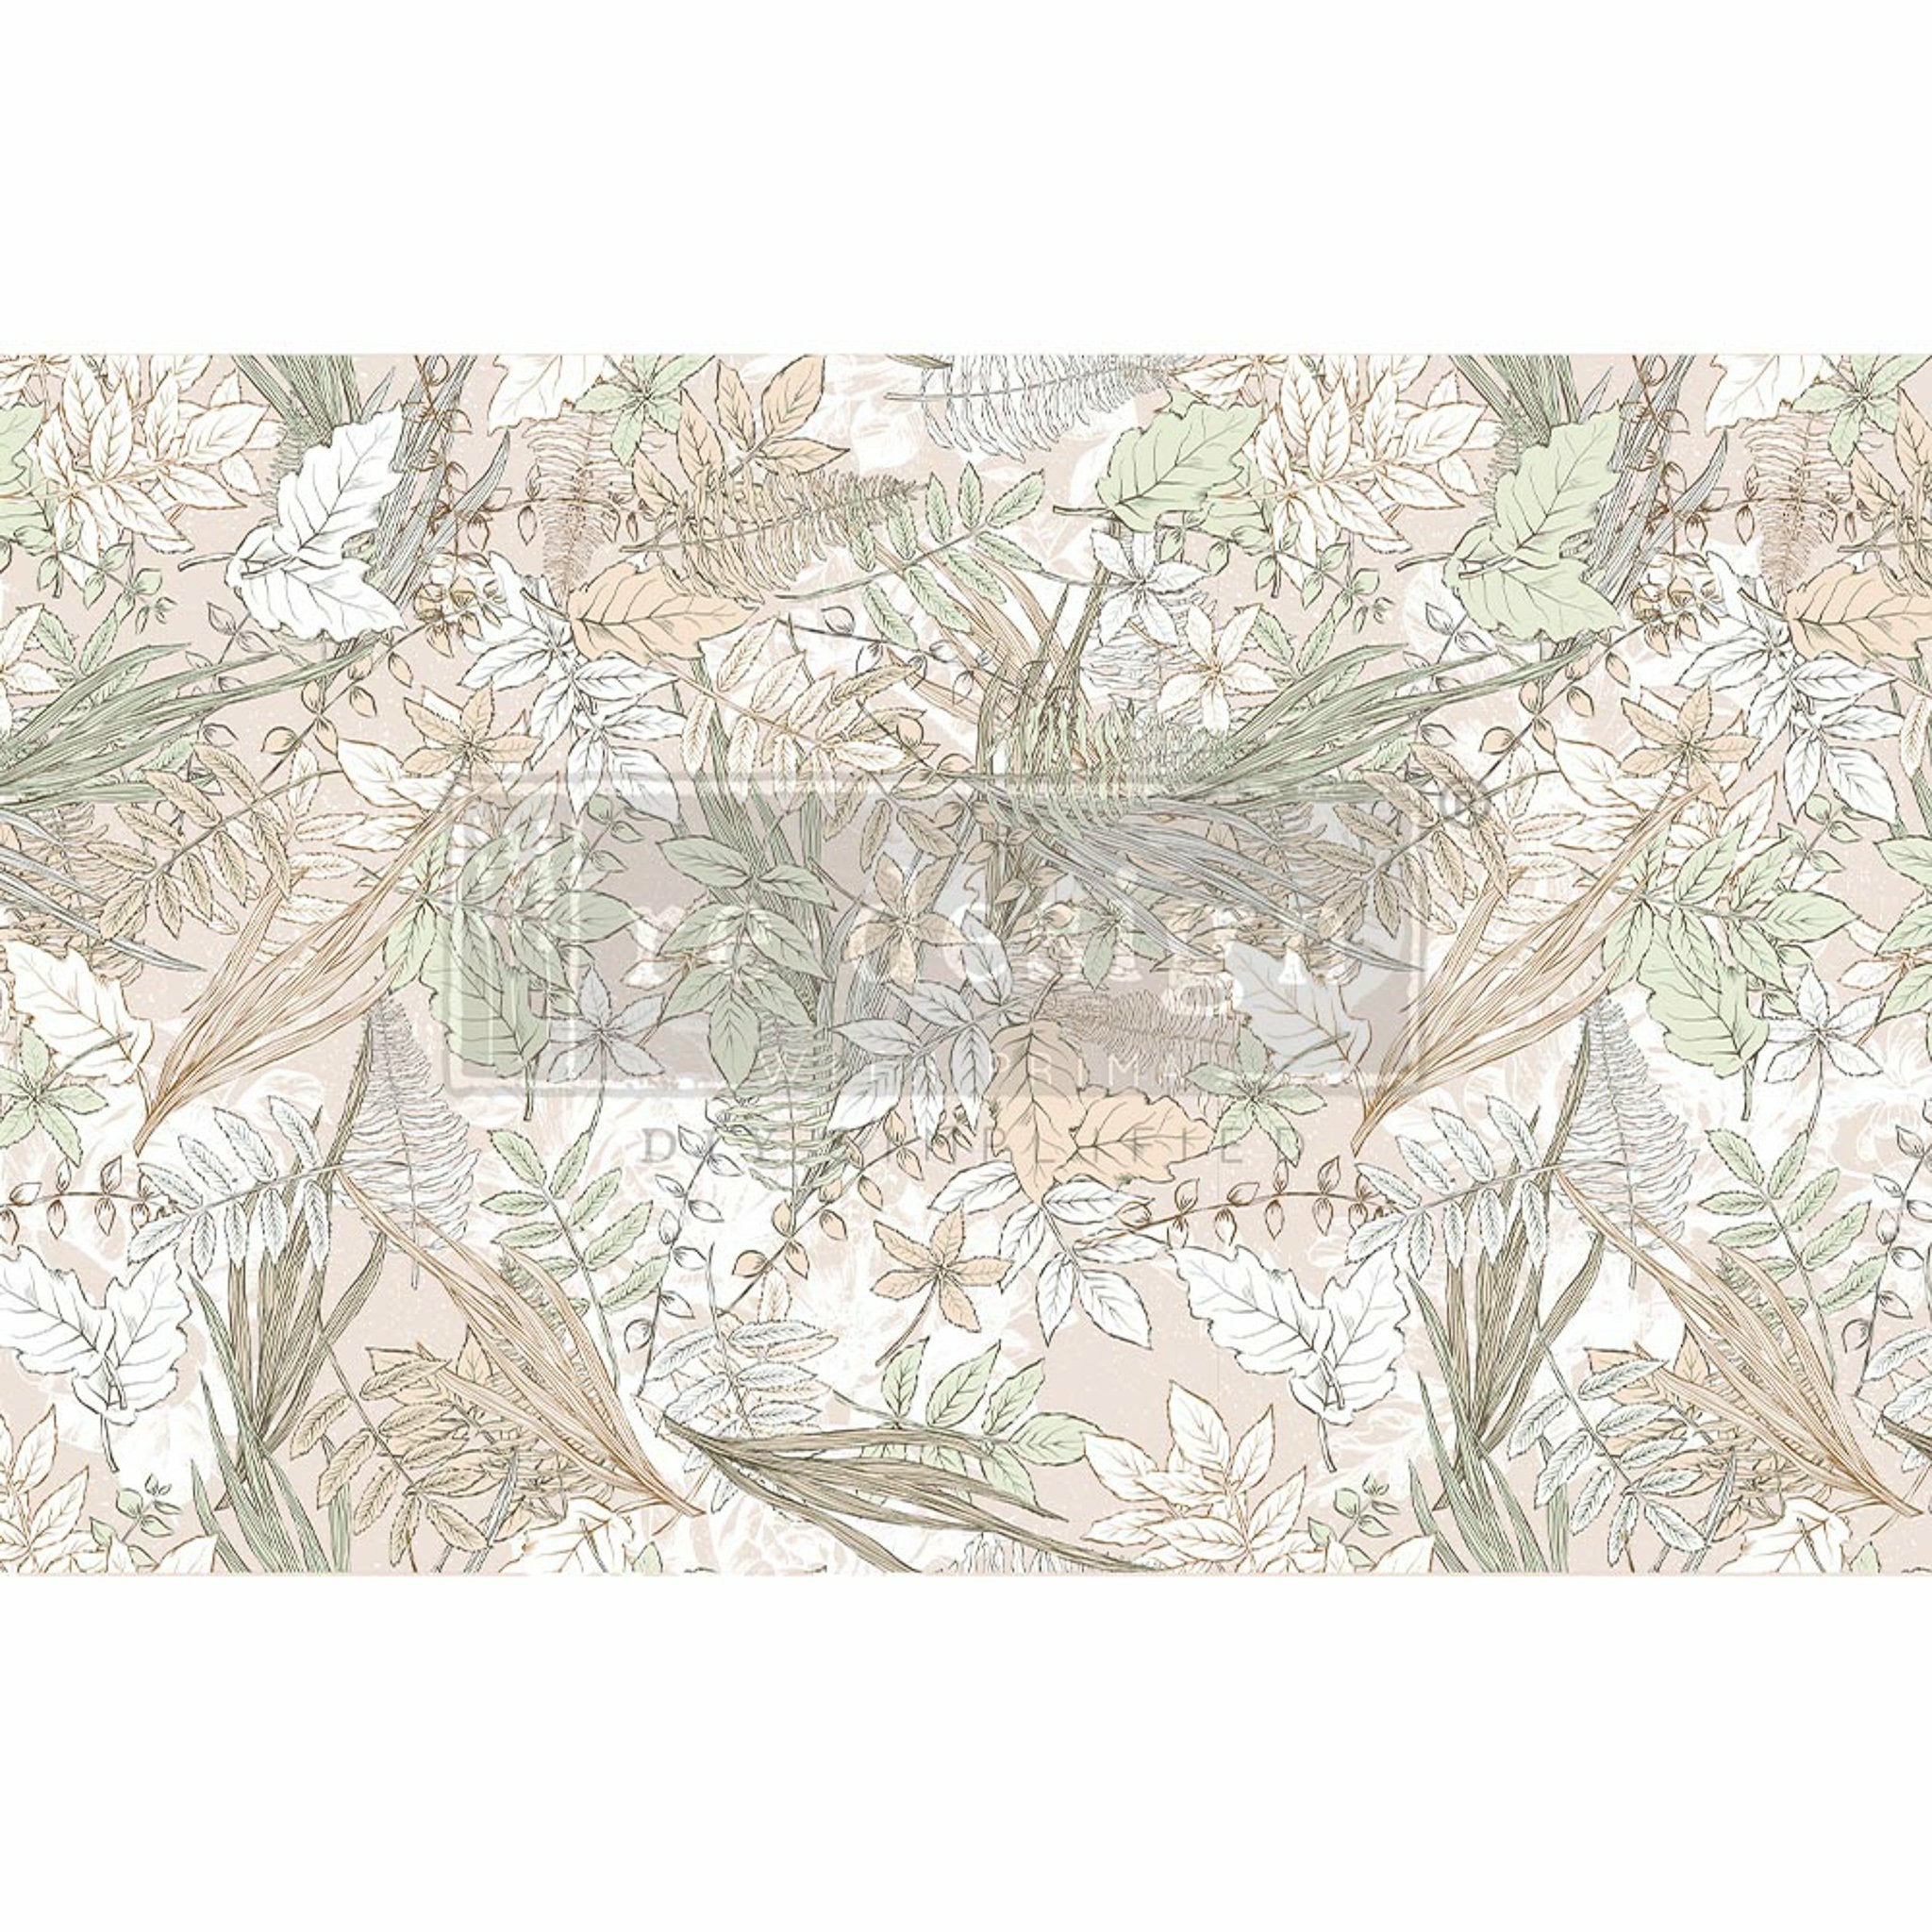 Muted watercolor style green and tan leaves tissue paper design. A transparent redesign logo is placed in the center. 